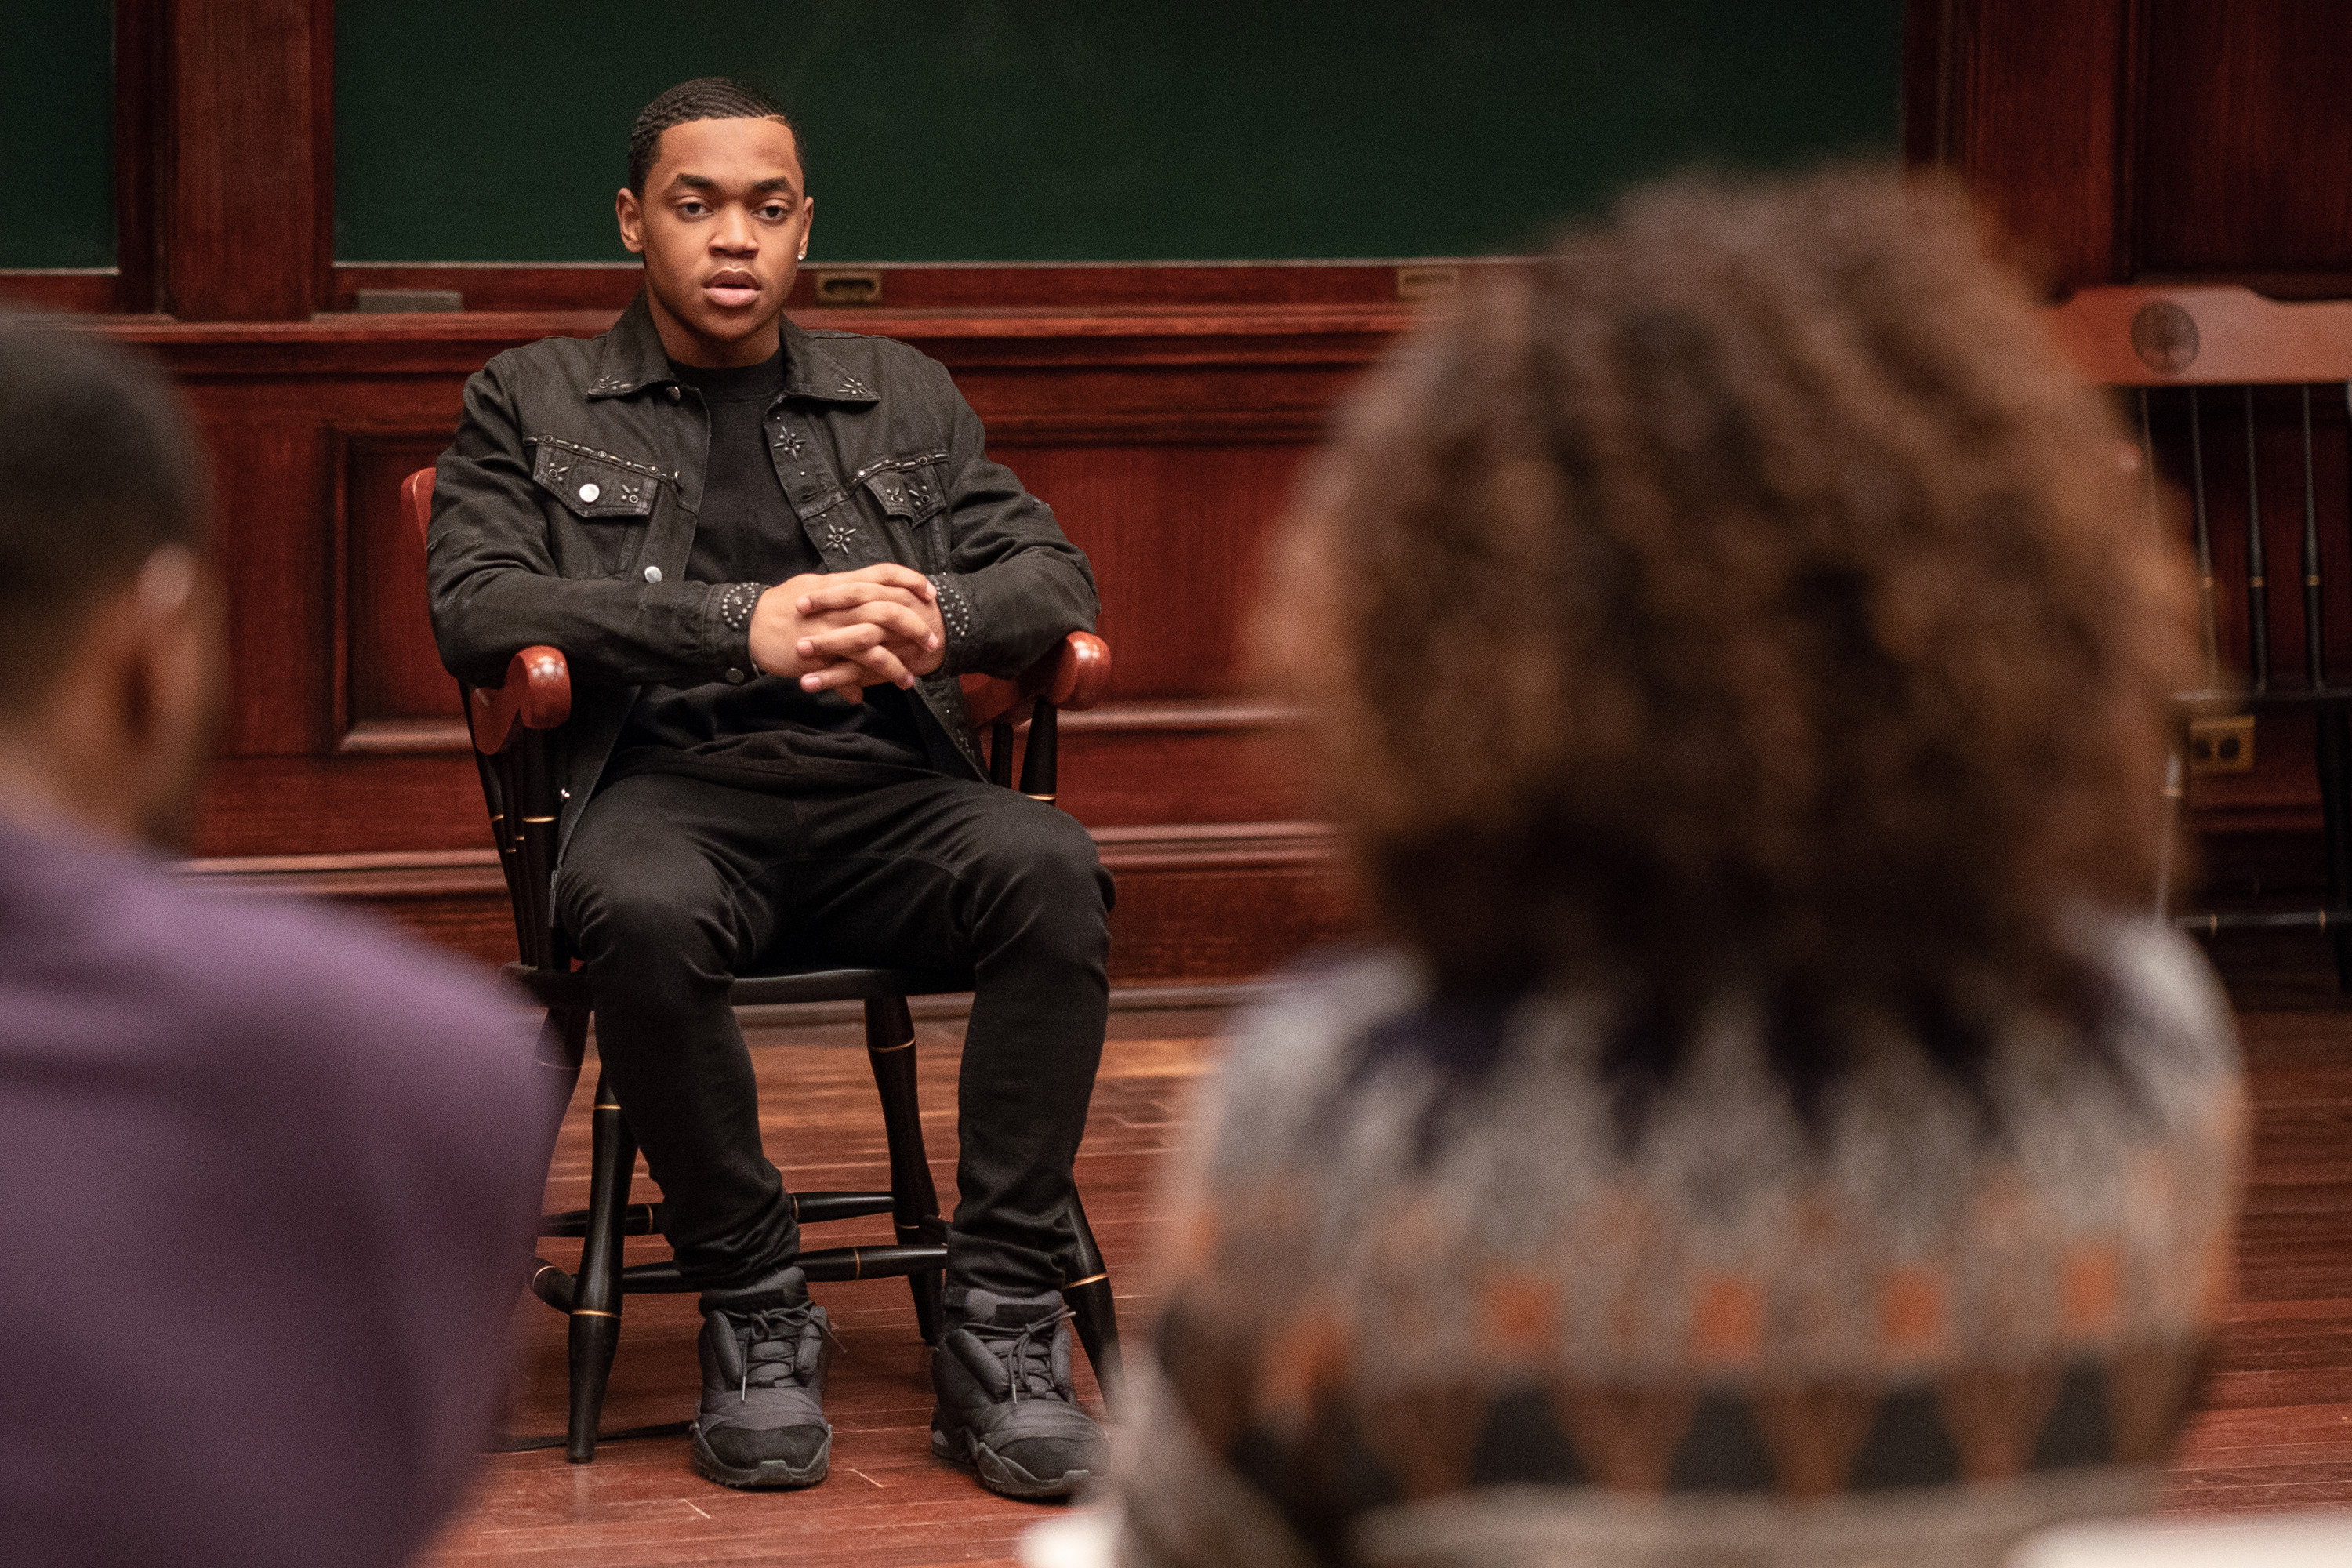 Power Ghost Ep. 304 Recap: Monet Solves a Problem, Cane Dirty Macks, Which  Tejada Will Die?